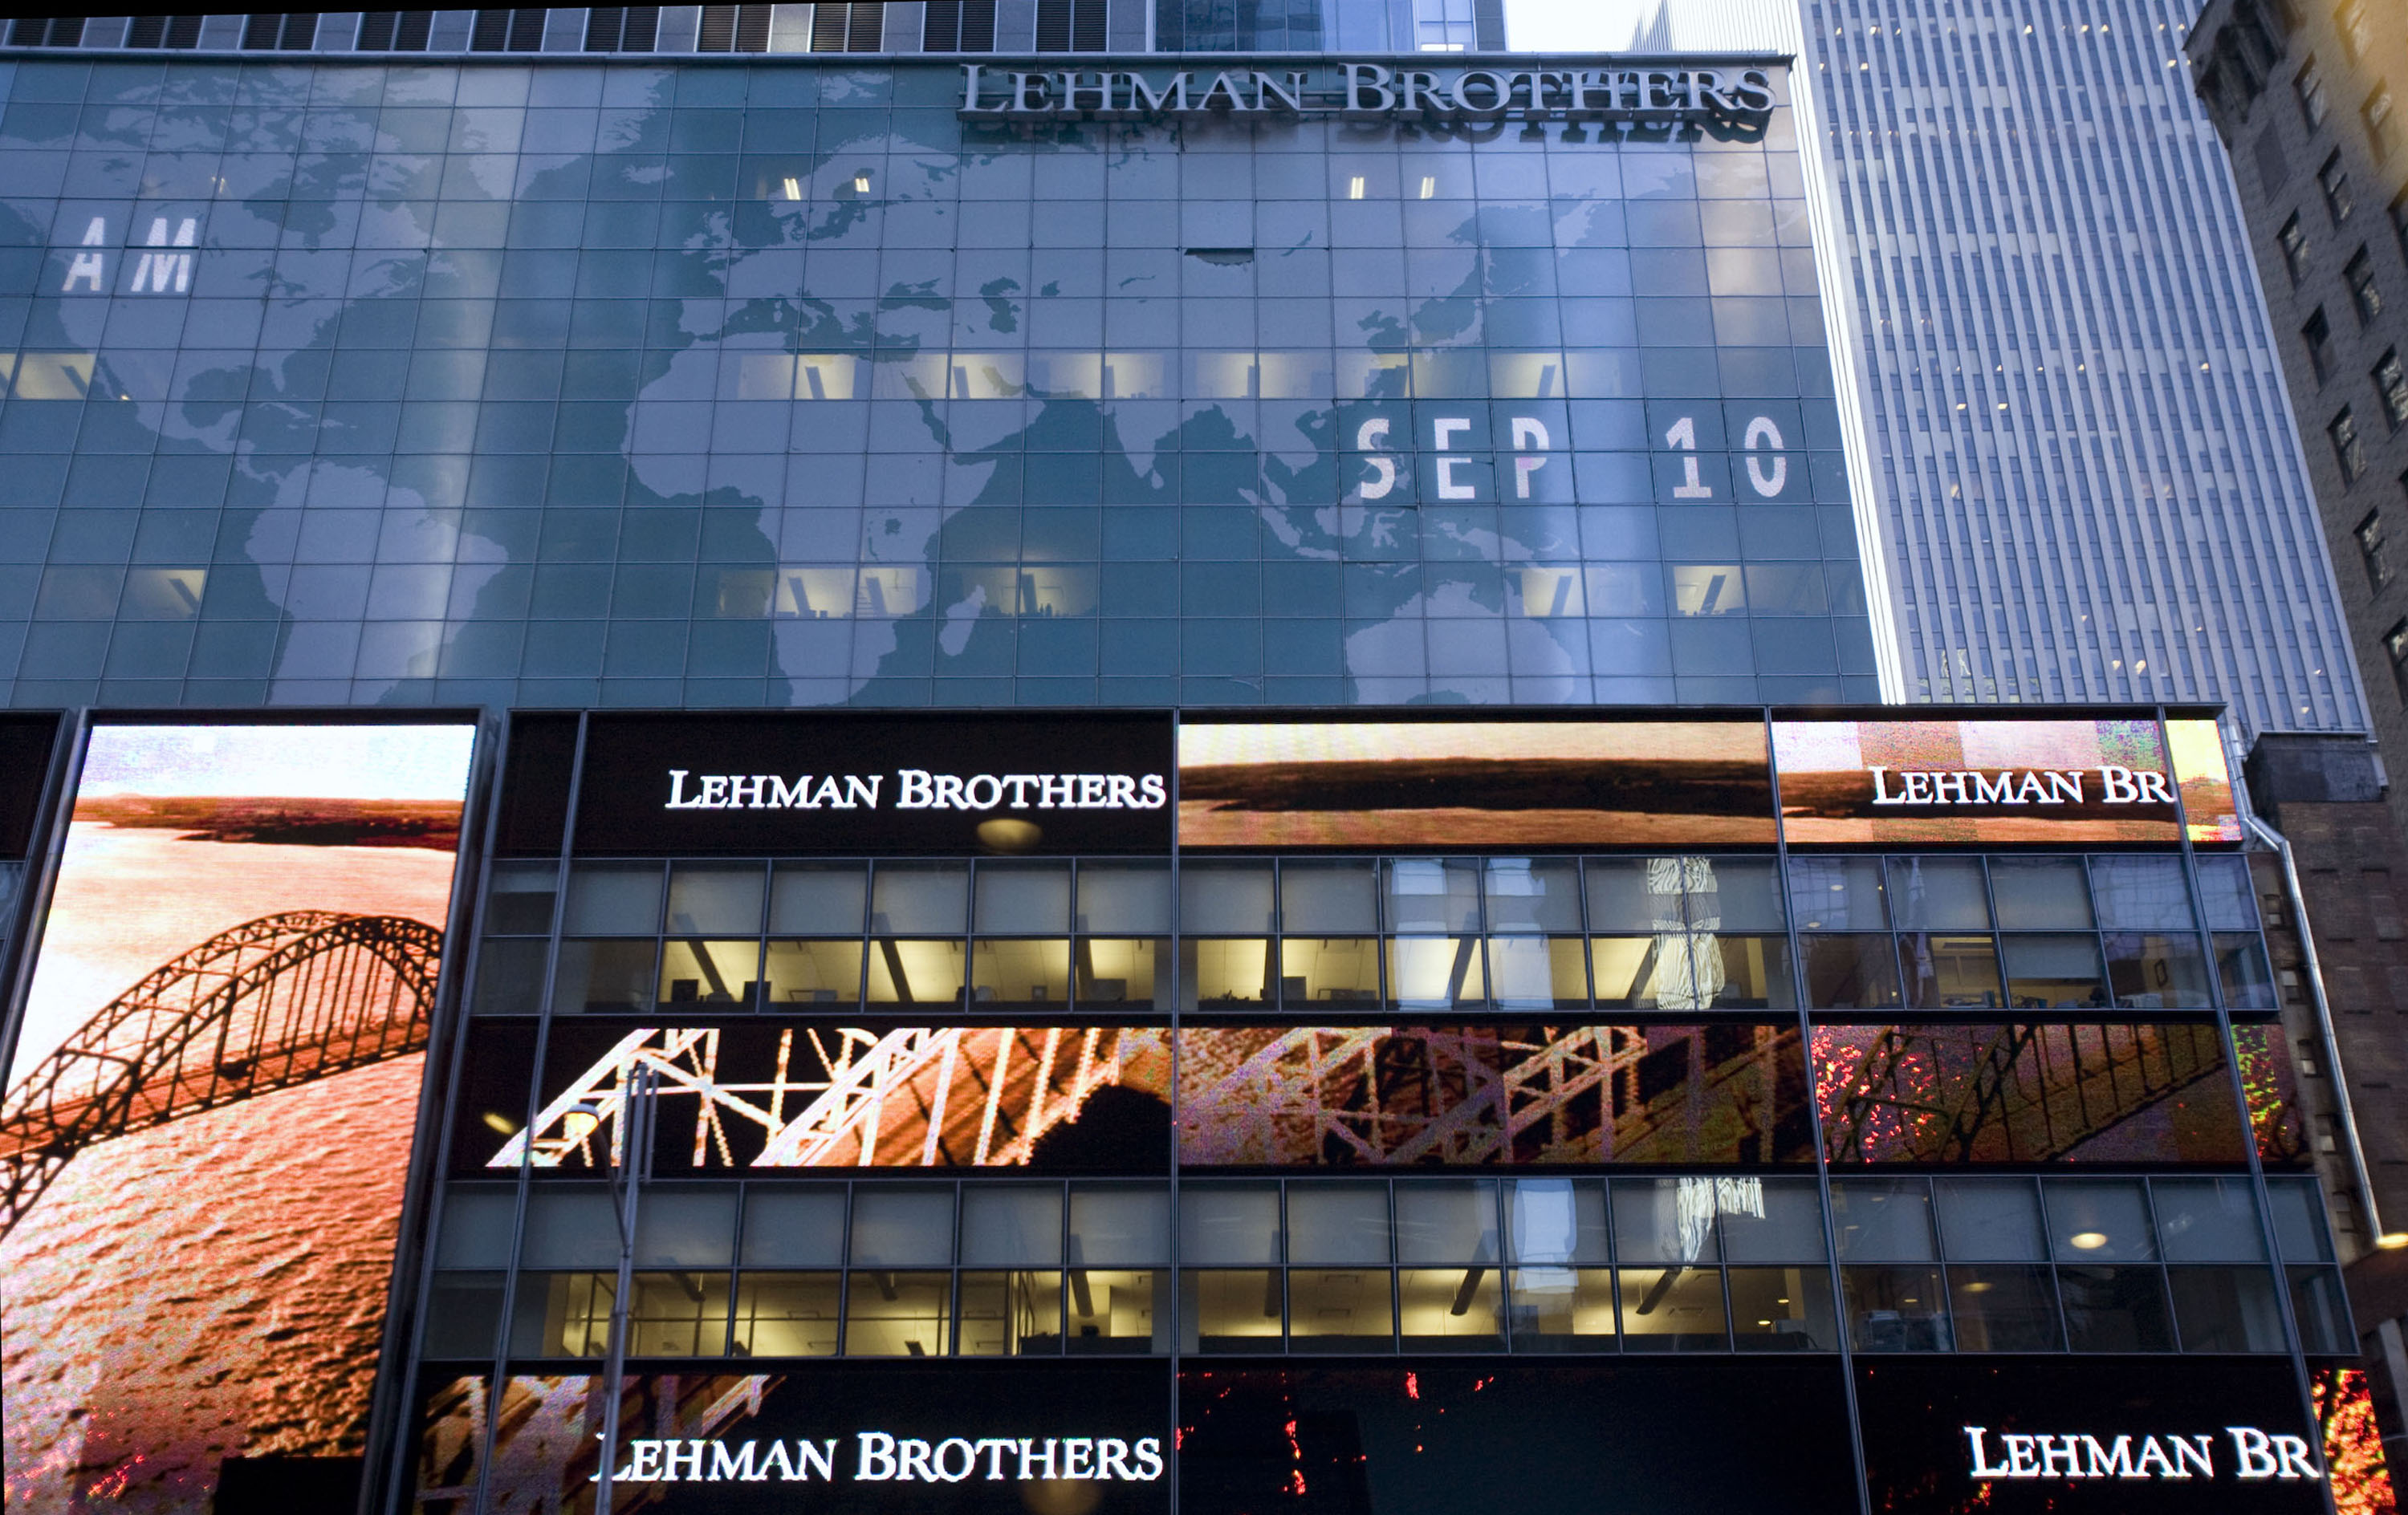 The headquarters of Lehman Brothers Holdings Inc. in&nbsp;New York&nbsp;on Wednesday, Sept. 10, 2008, just days before it filed for bankruptcy.